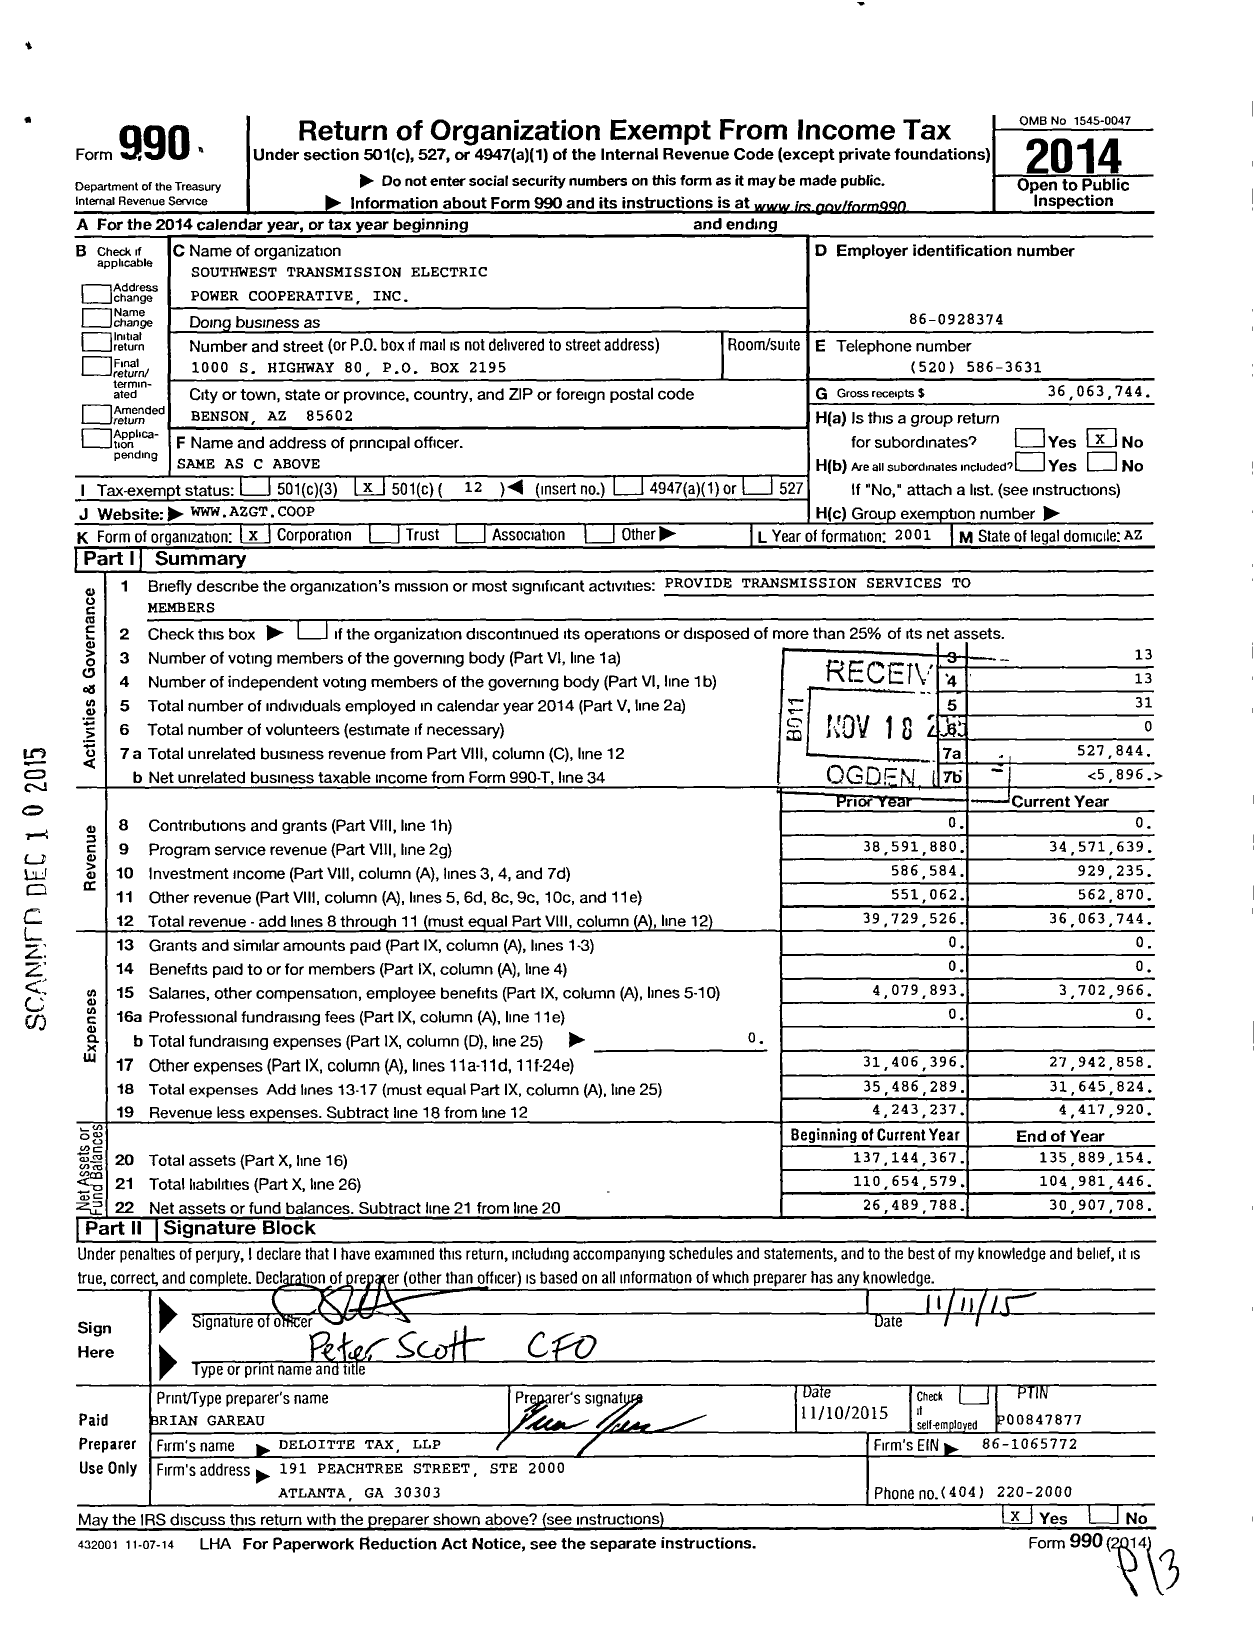 Image of first page of 2014 Form 990O for Southwest Transmission Electric Power Cooperative